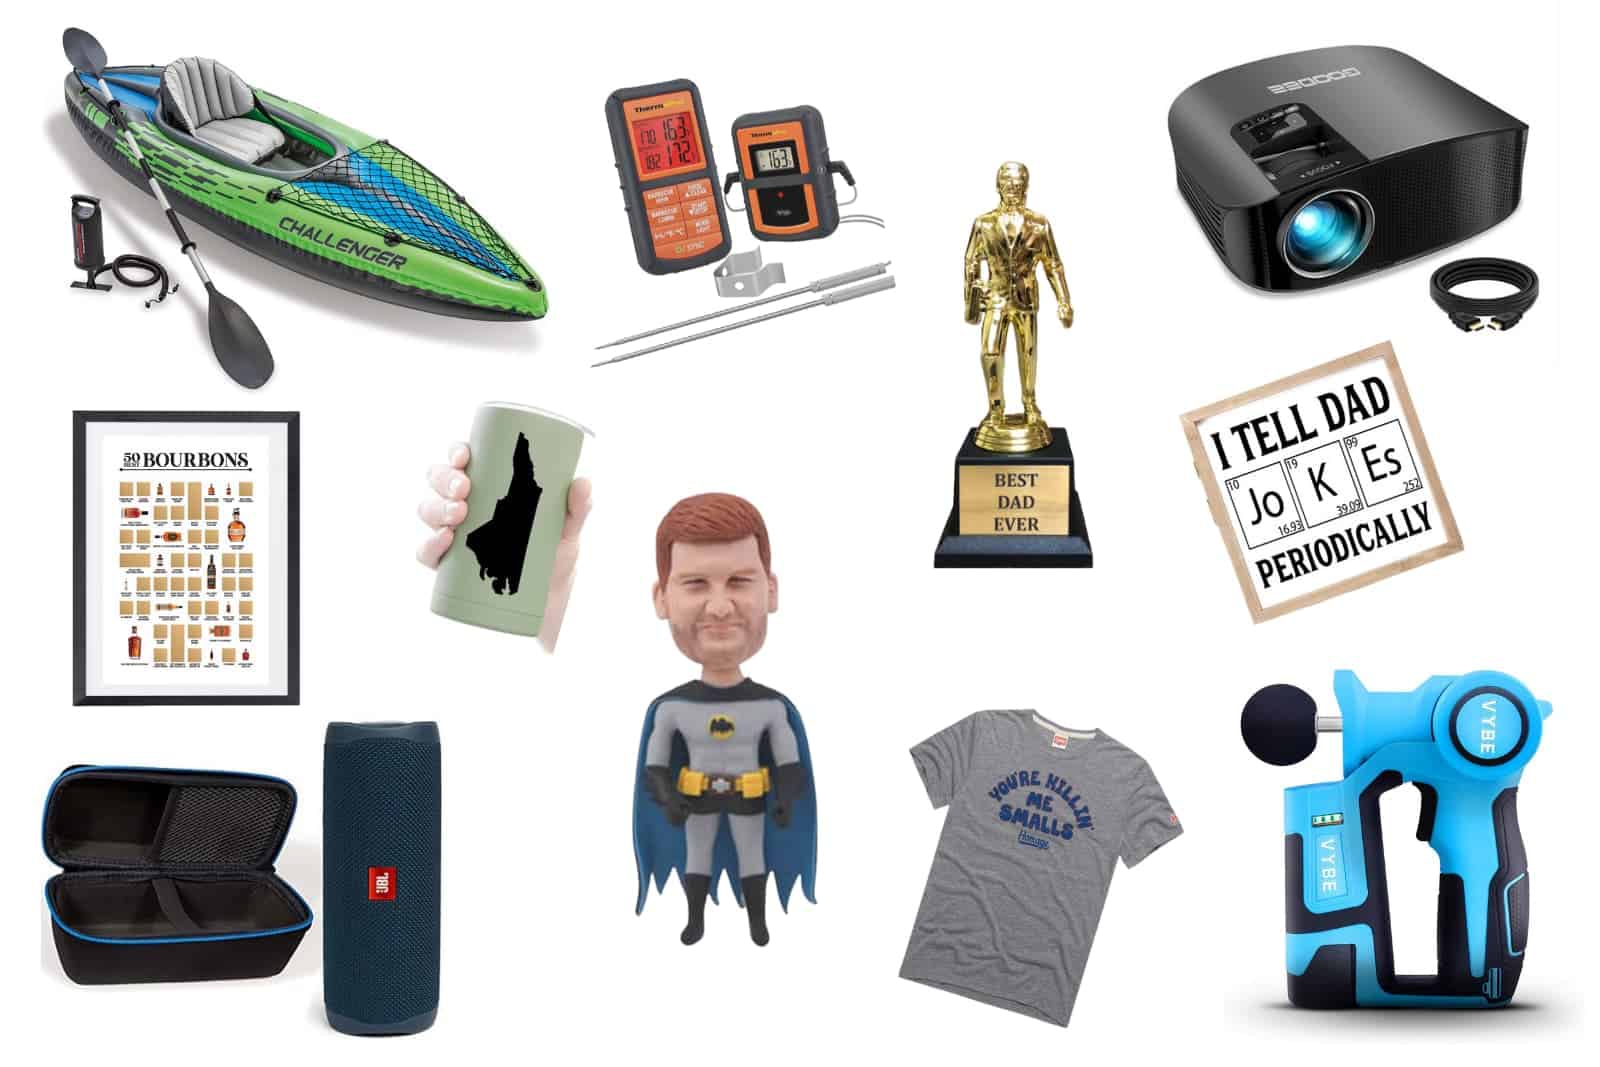 Fun Gifts for Dads Who Want Nothing cover image. Eleven fun gifts for dads: kayak, grill thermometer, Best Dad Ever Dundie, projector, dad jokes sign, hopsulator, bourbon scratch off, speaker, tshirt, personalized bobblehead, massage gun